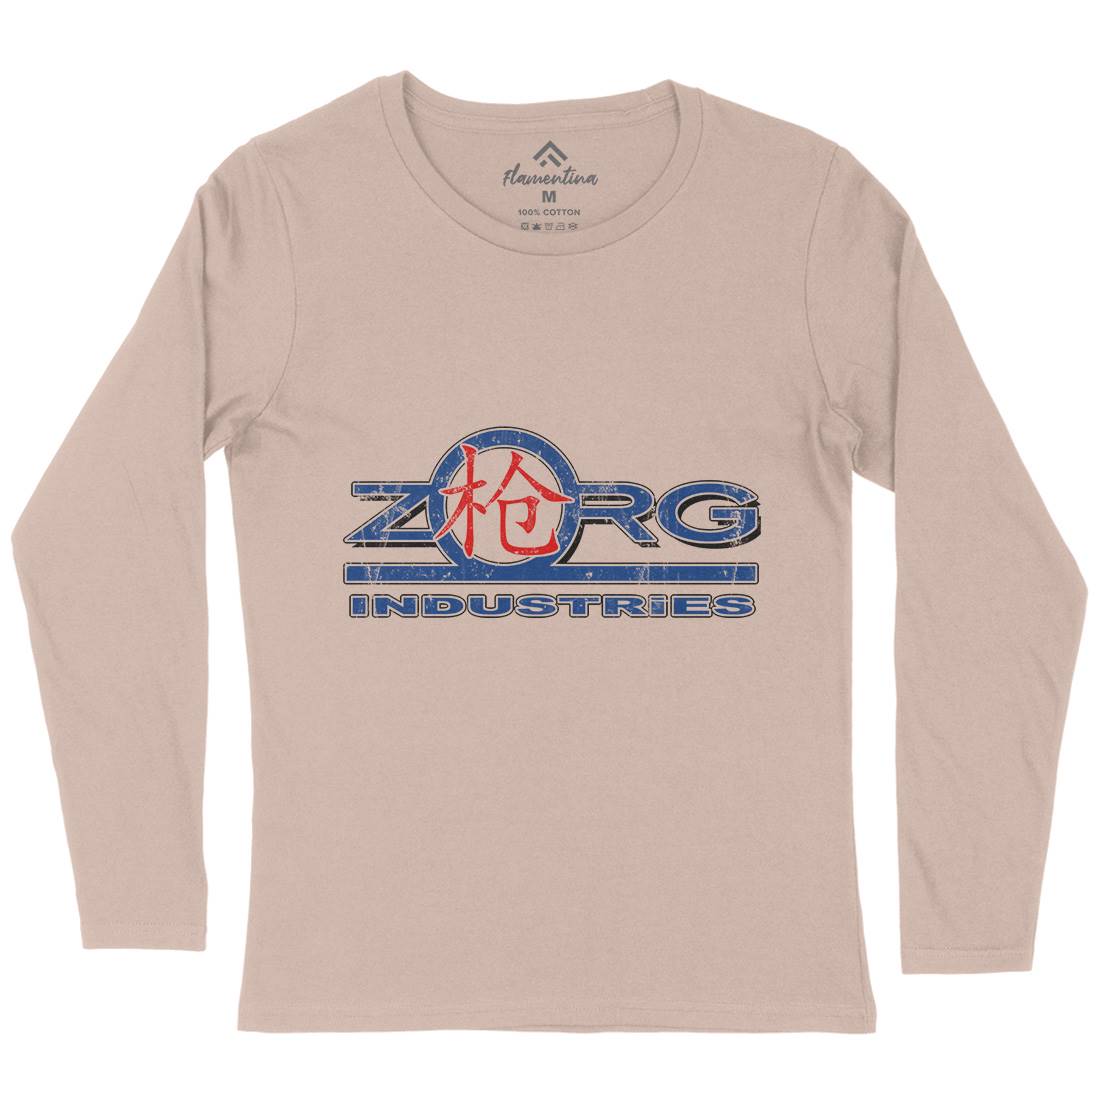 Zorg Ind Womens Long Sleeve T-Shirt Space D105